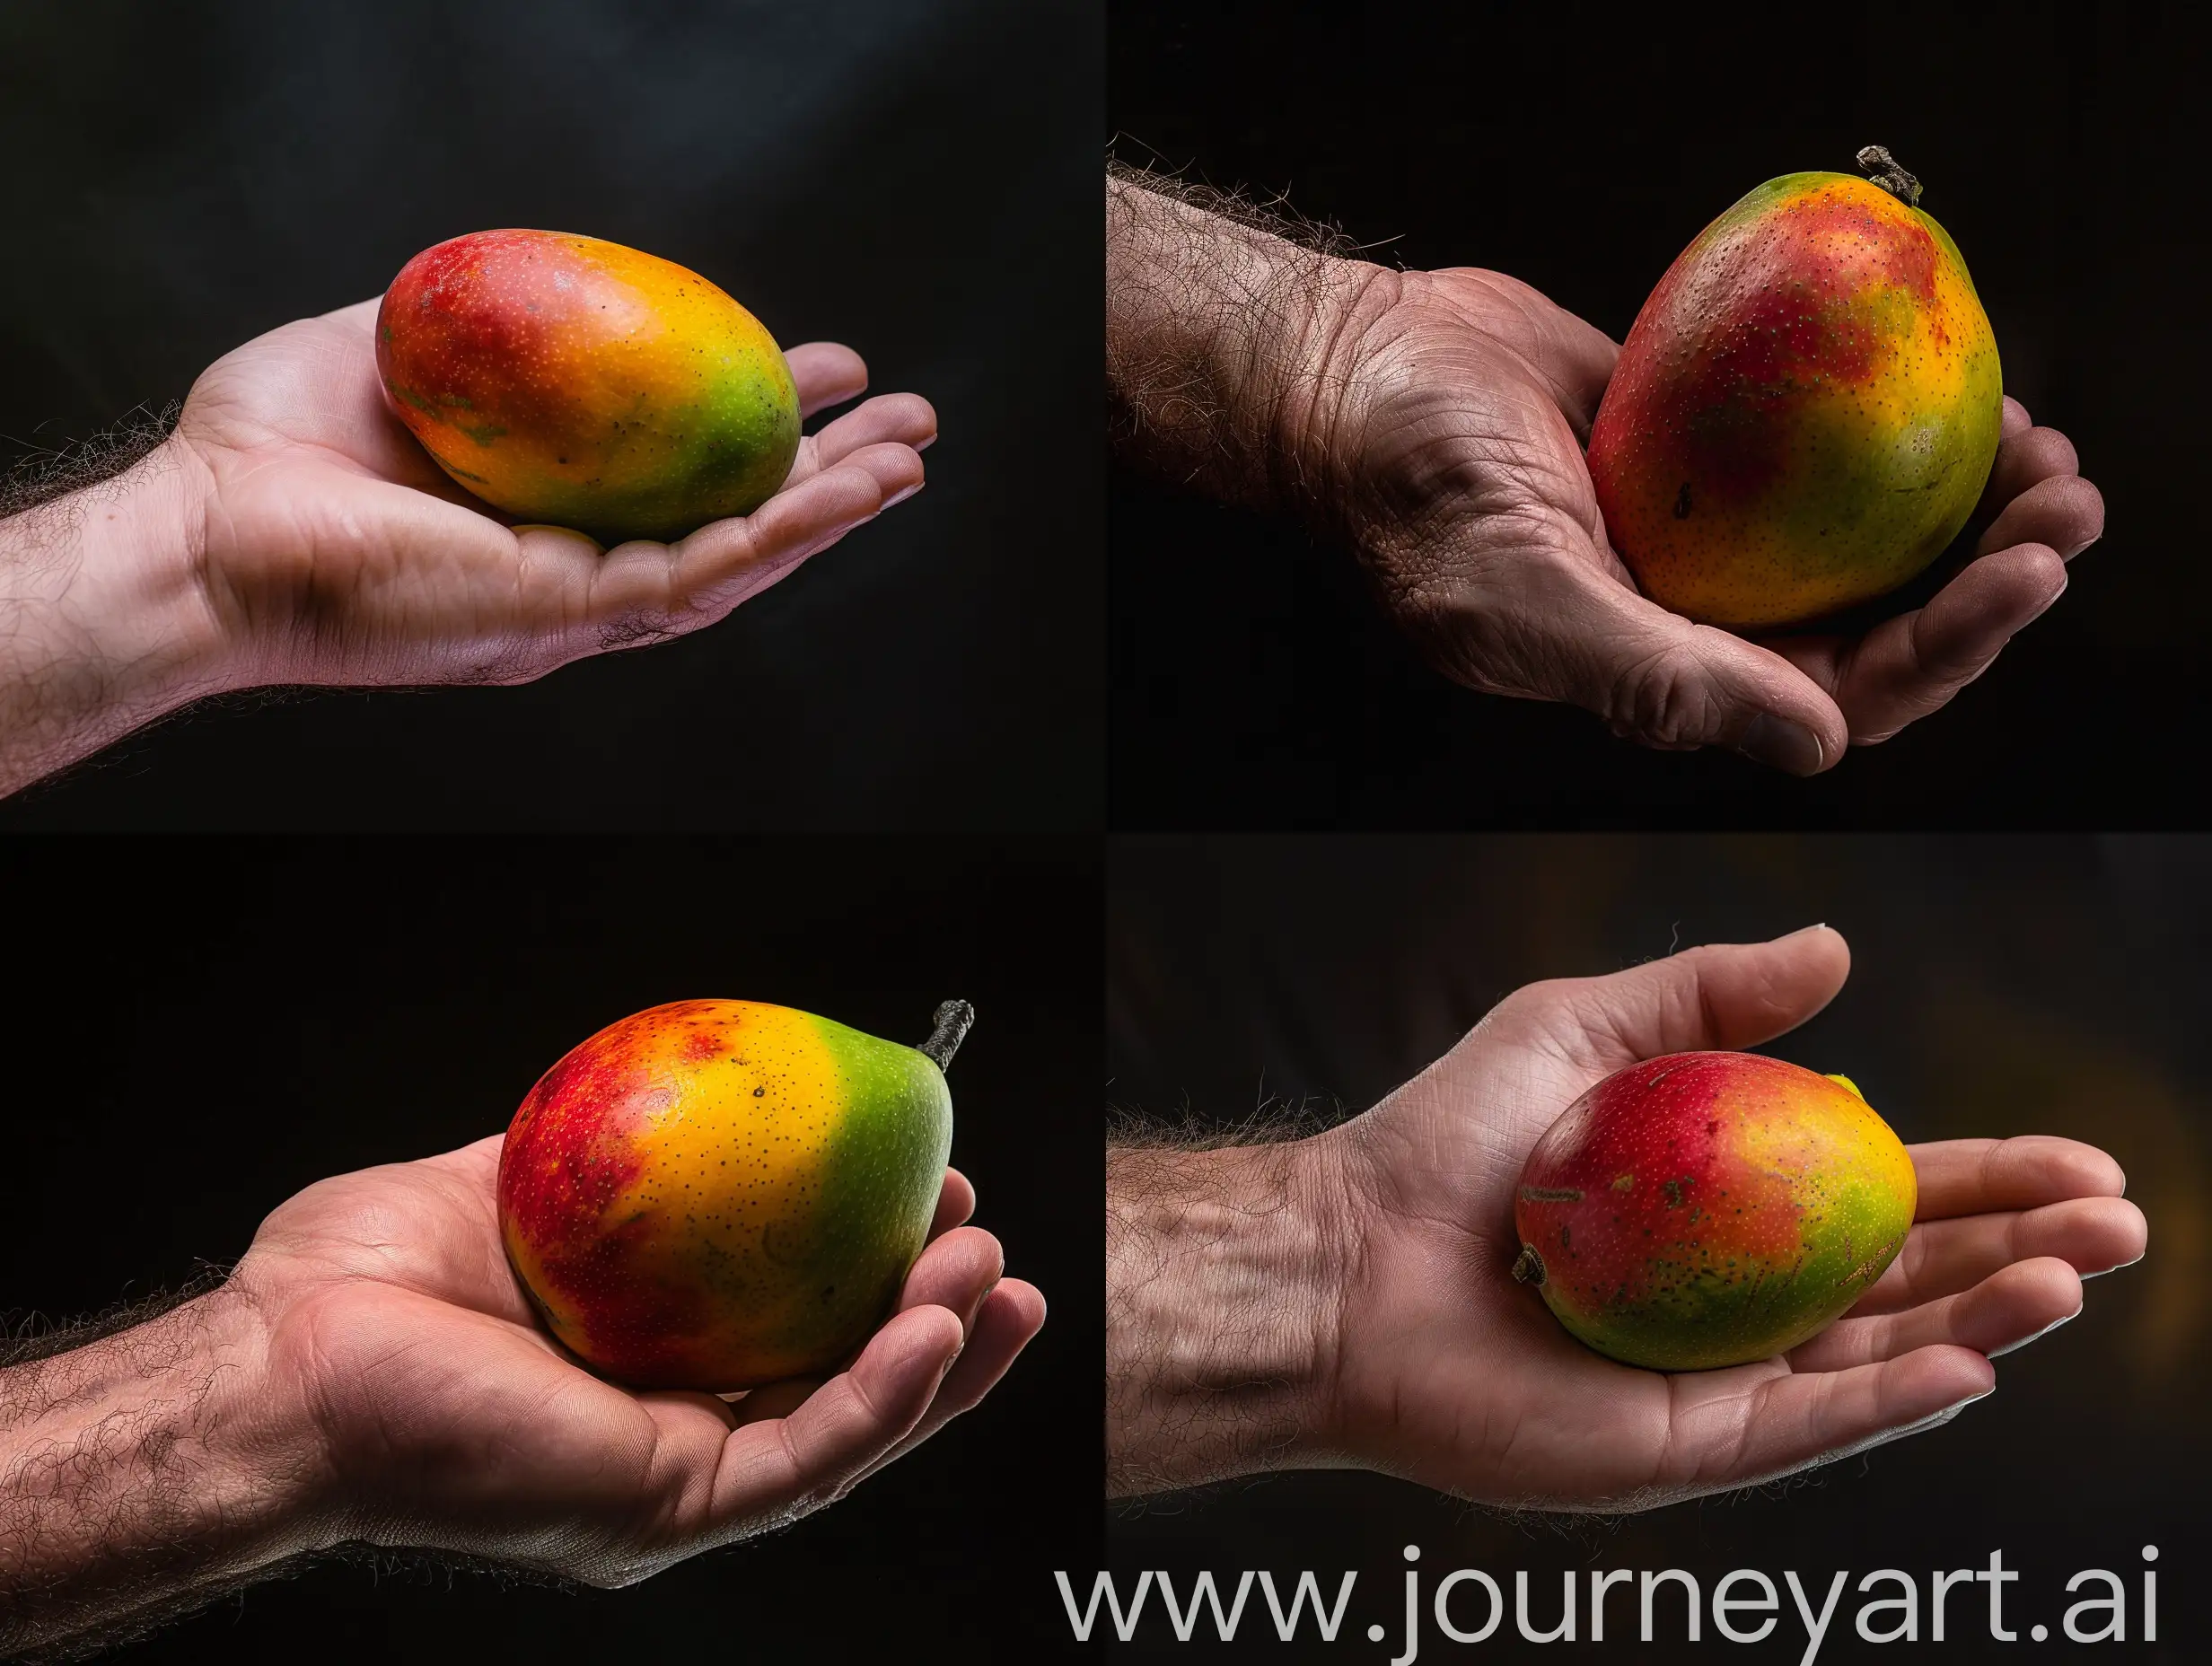 mango in a man's hand on a black background